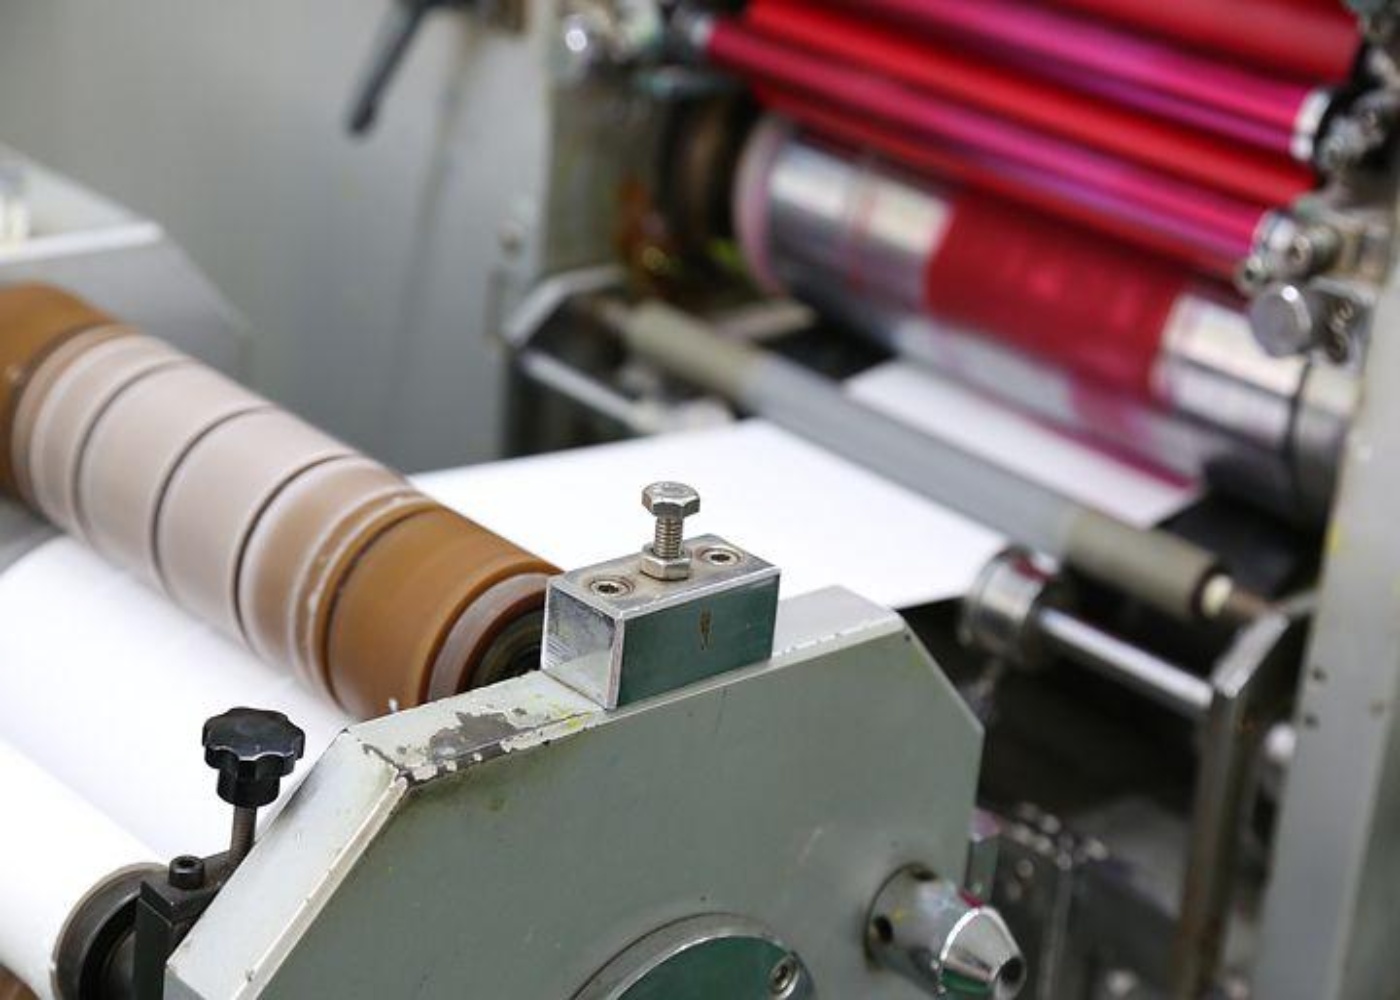 What You Need To Know Before Choosing a Printing Services